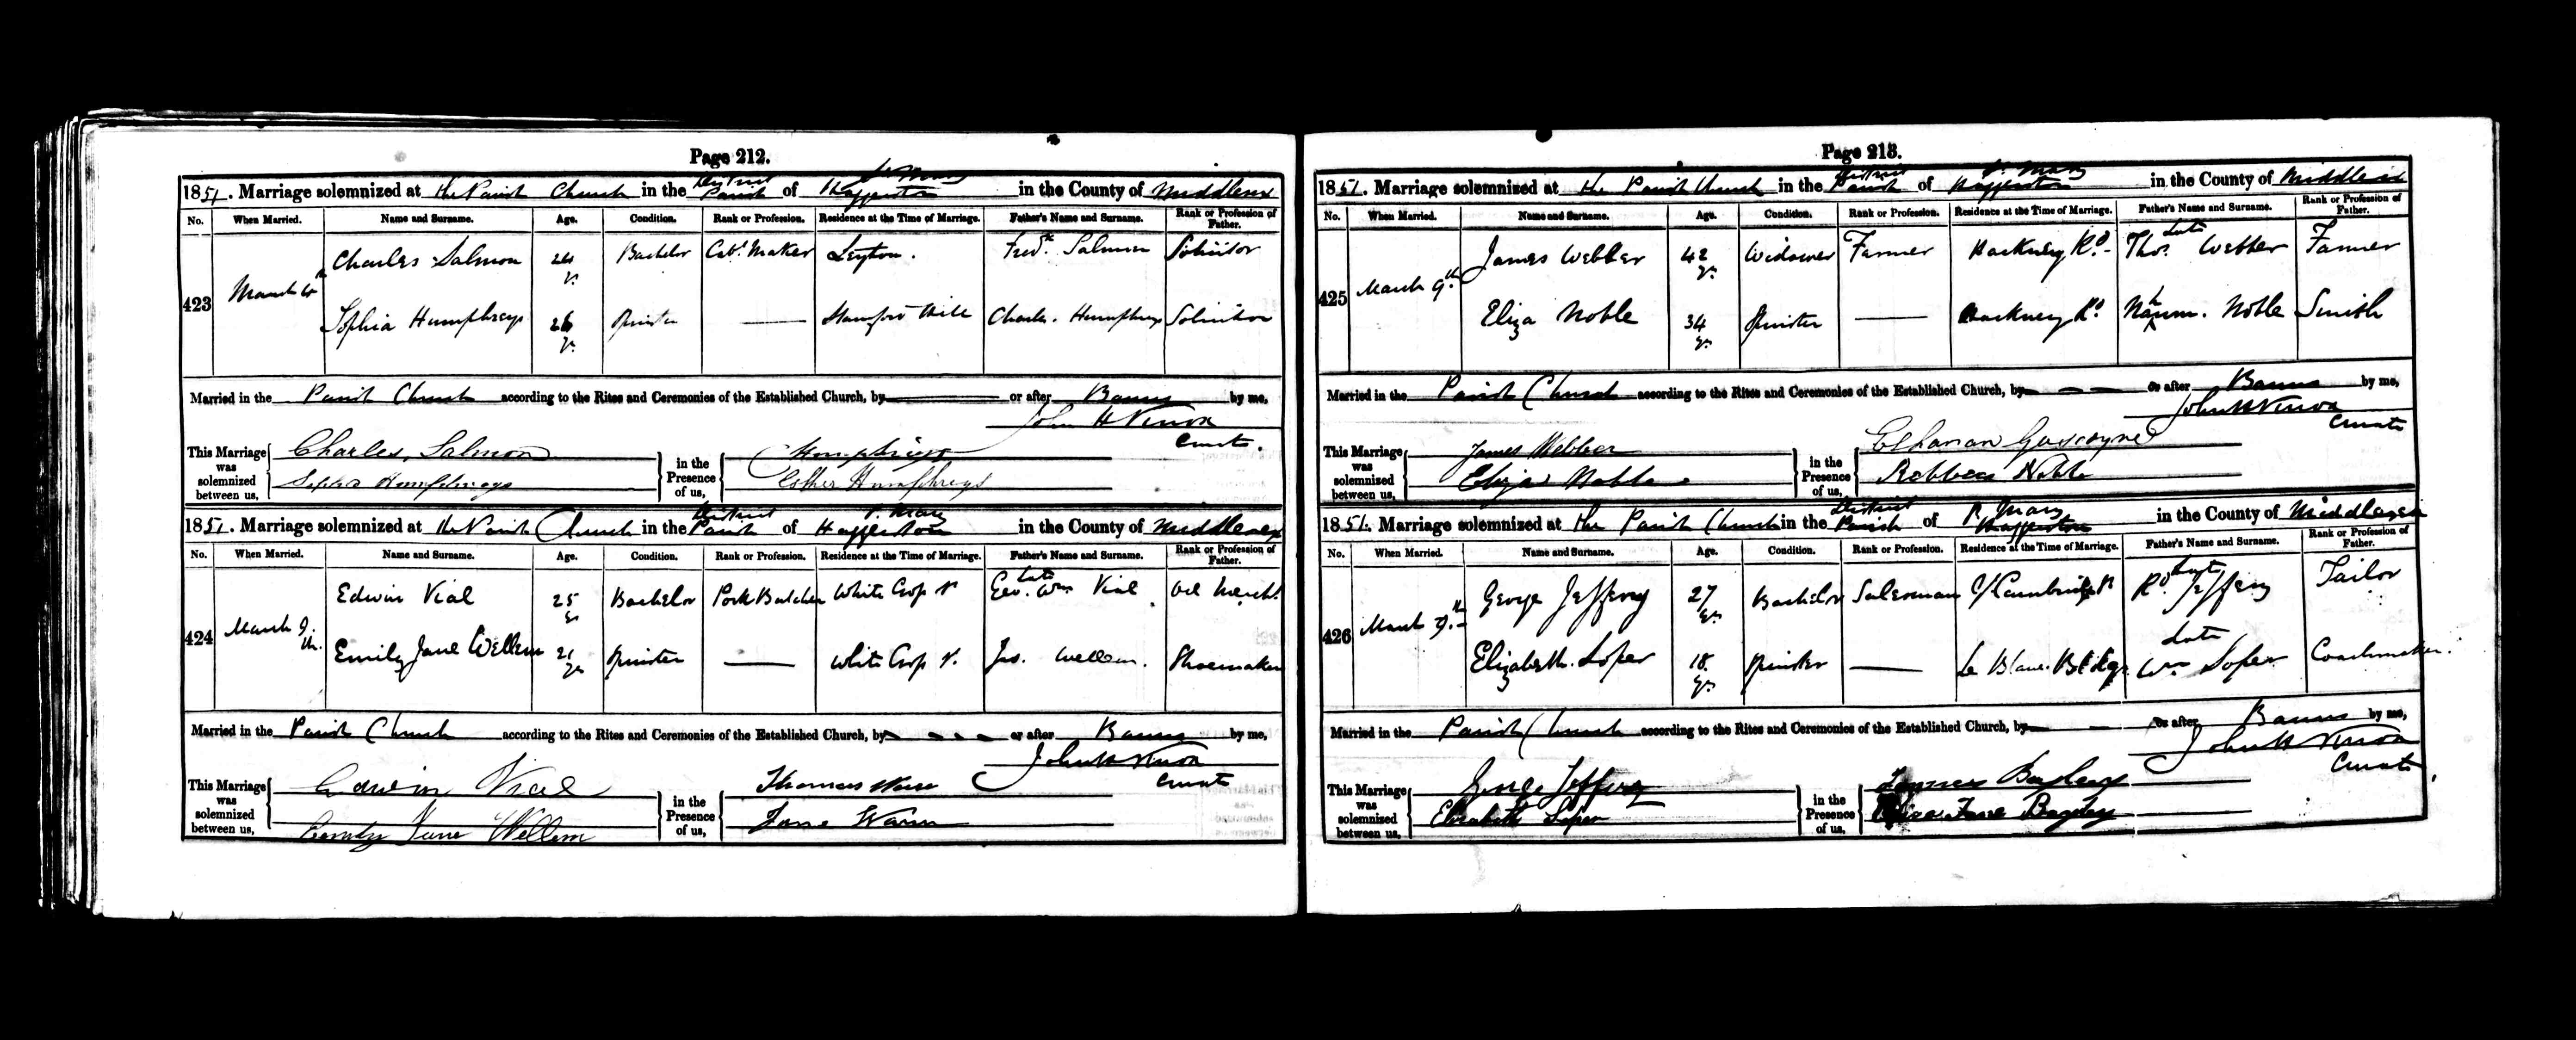 1851 marriage of Sophia Humphreys to Charles Alfred George Salmon